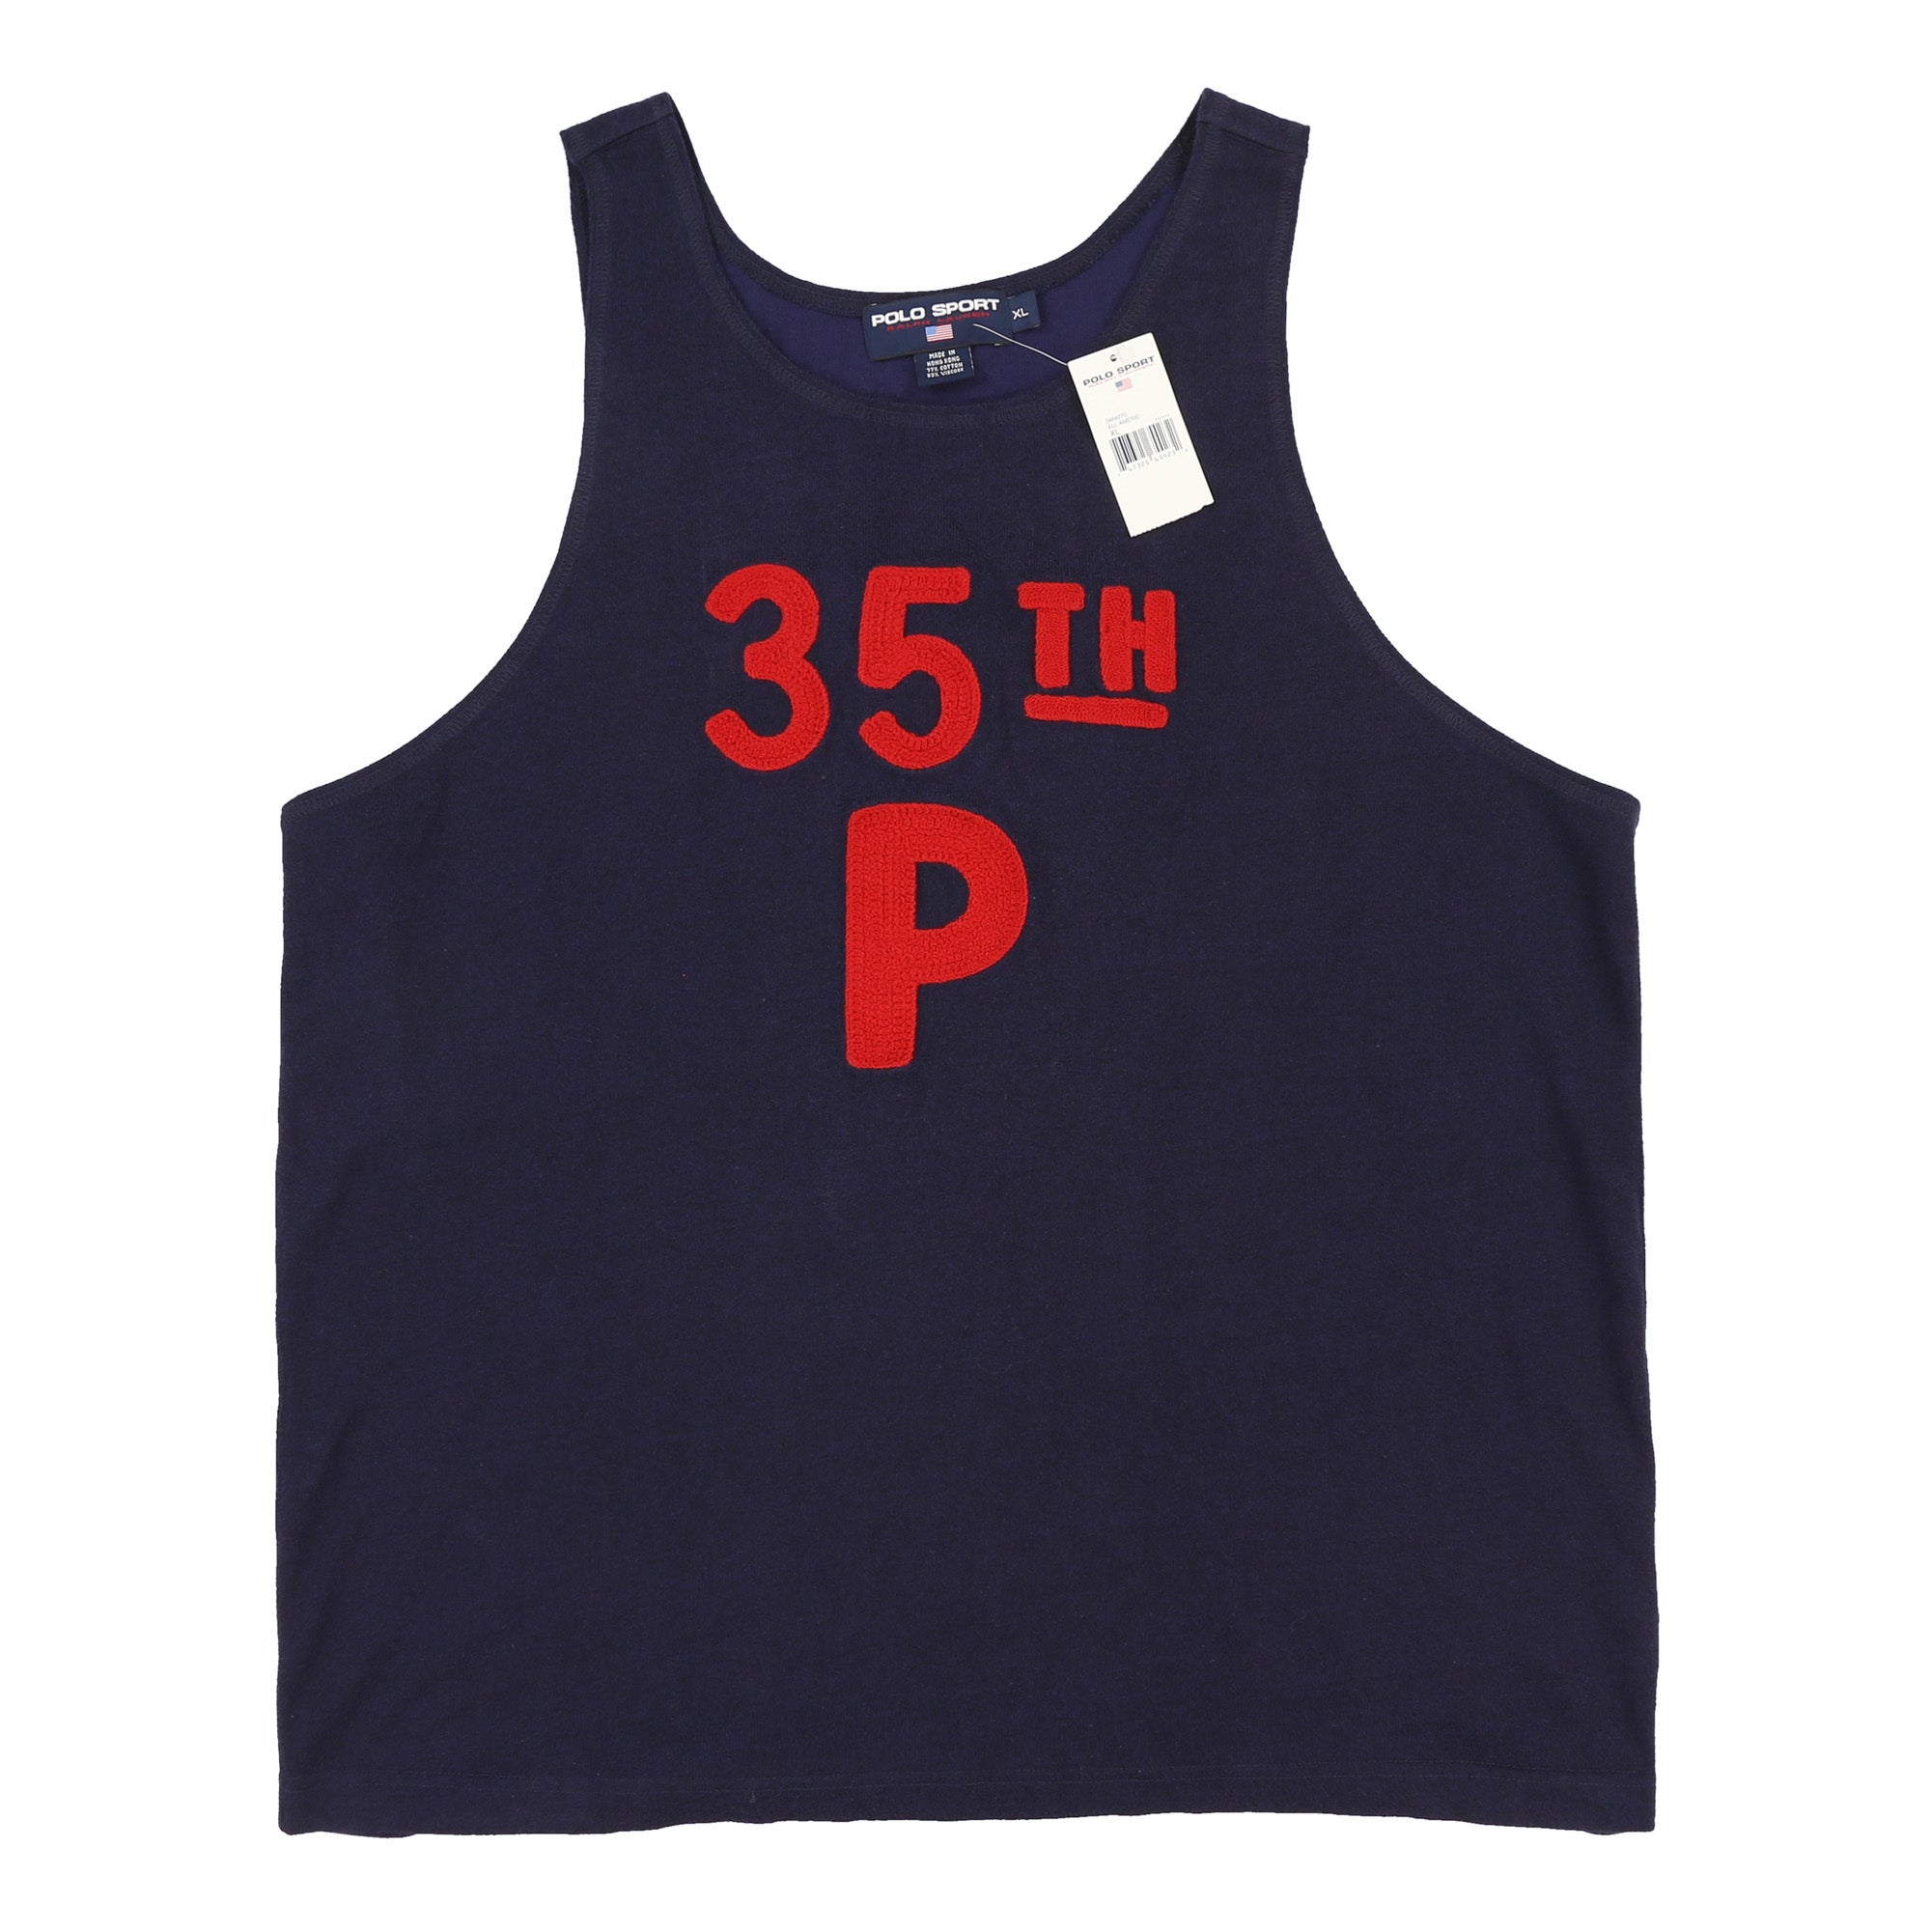 POLO SPORT ALL AMERICAN 35TH P TANK TOP // NAVY